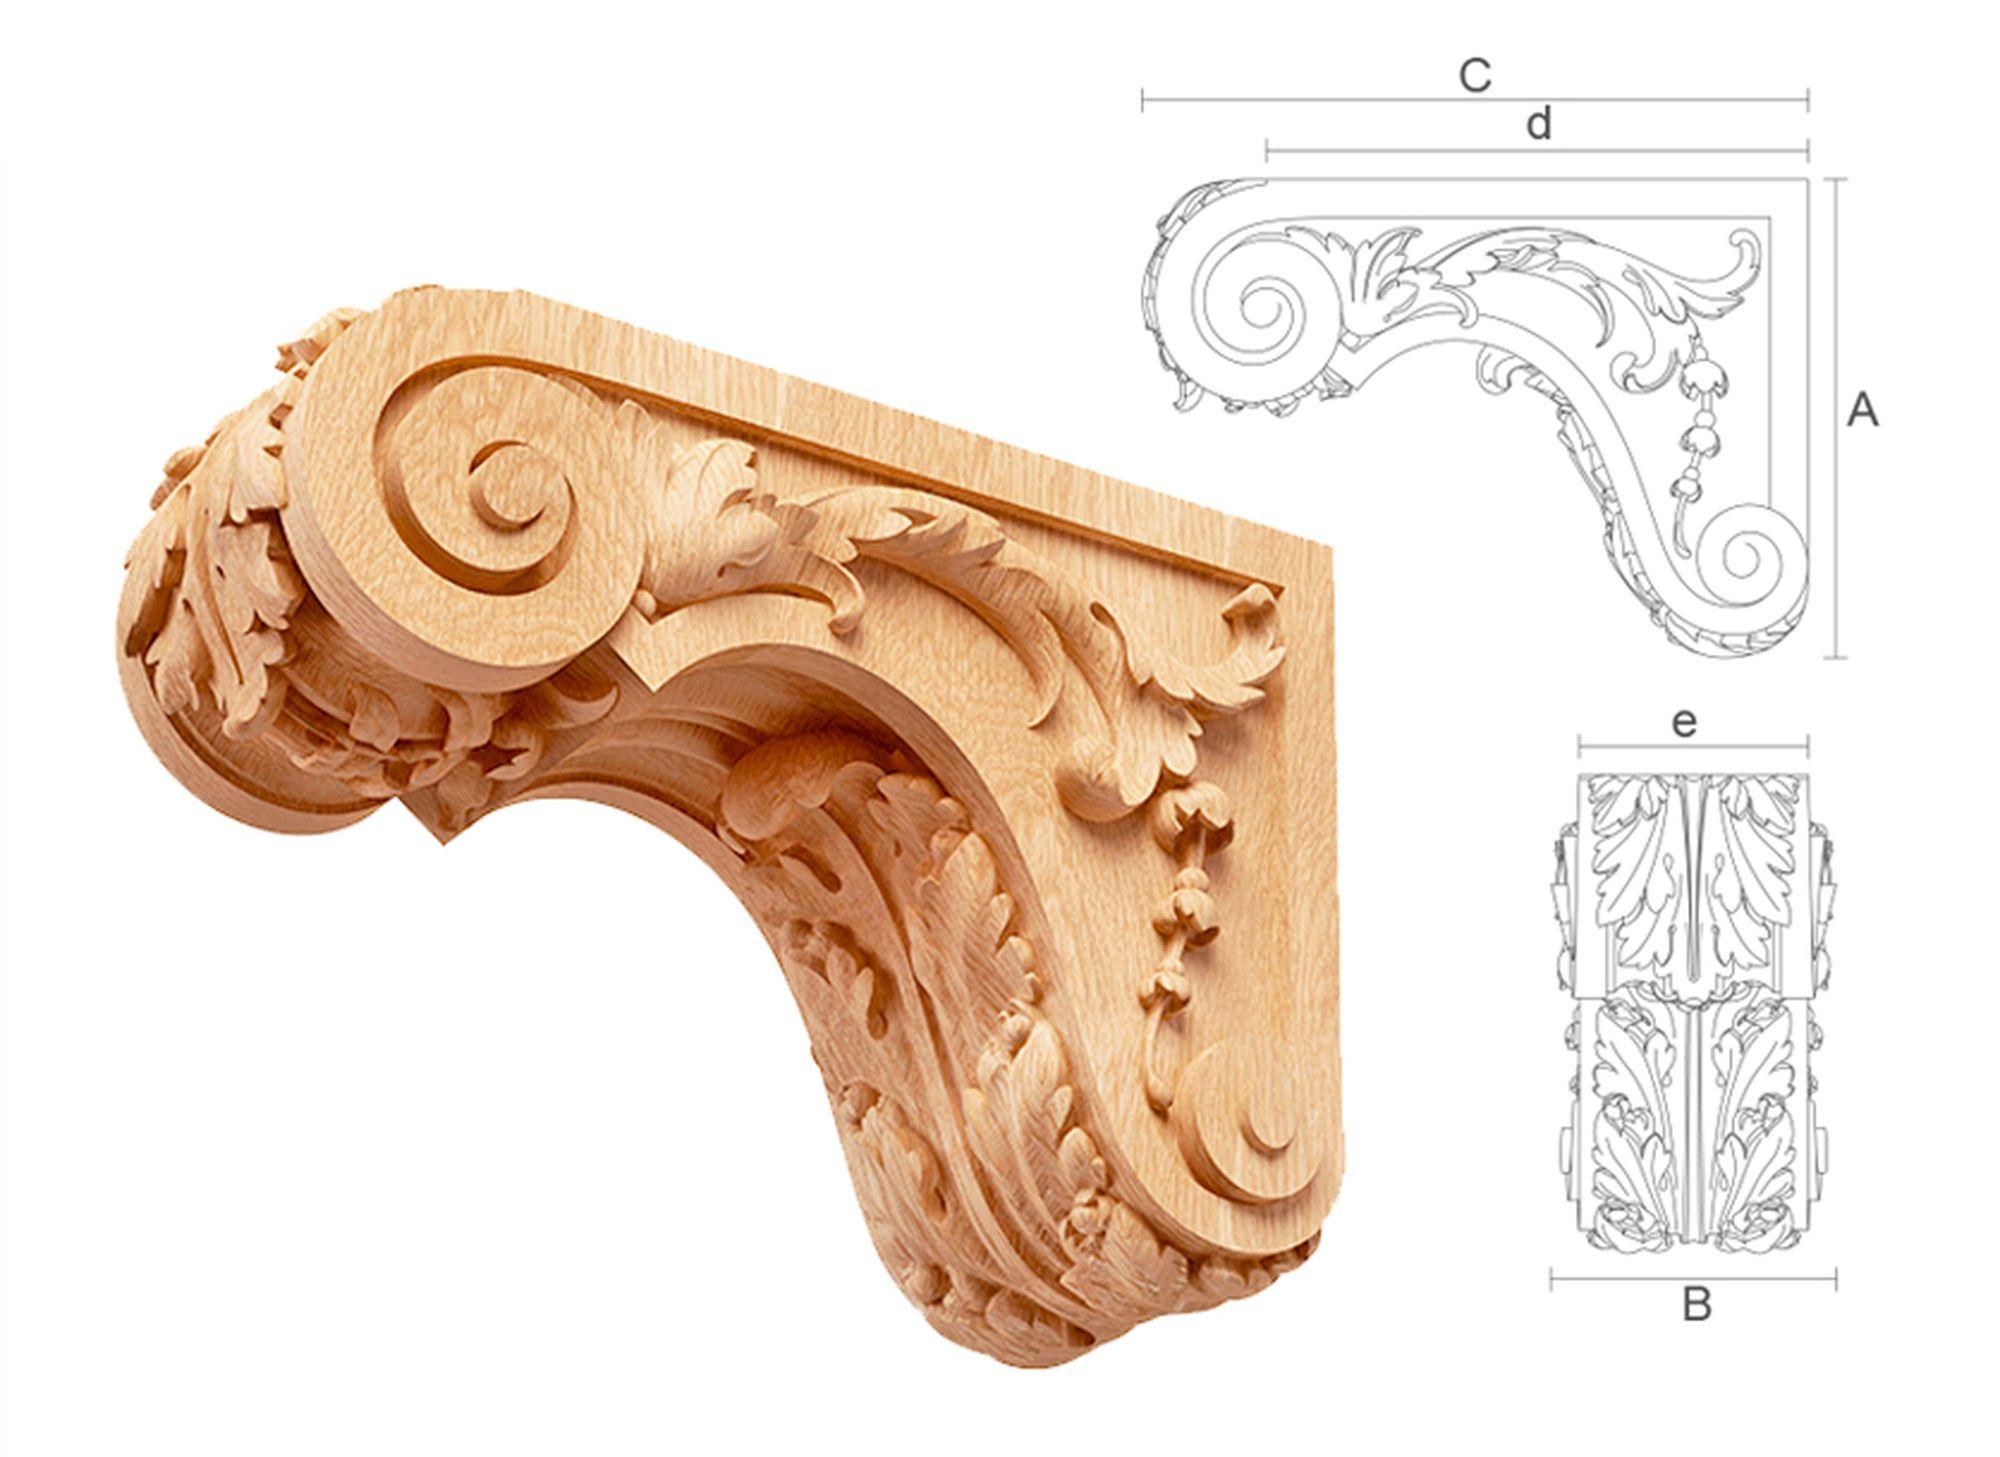 Set of 10 high-quality unfinished carved wooden corbels from oak or beech of your choice.

>> SKU: KR-054

>> Dimensions (A x B x C x d x e):

1) 4.53